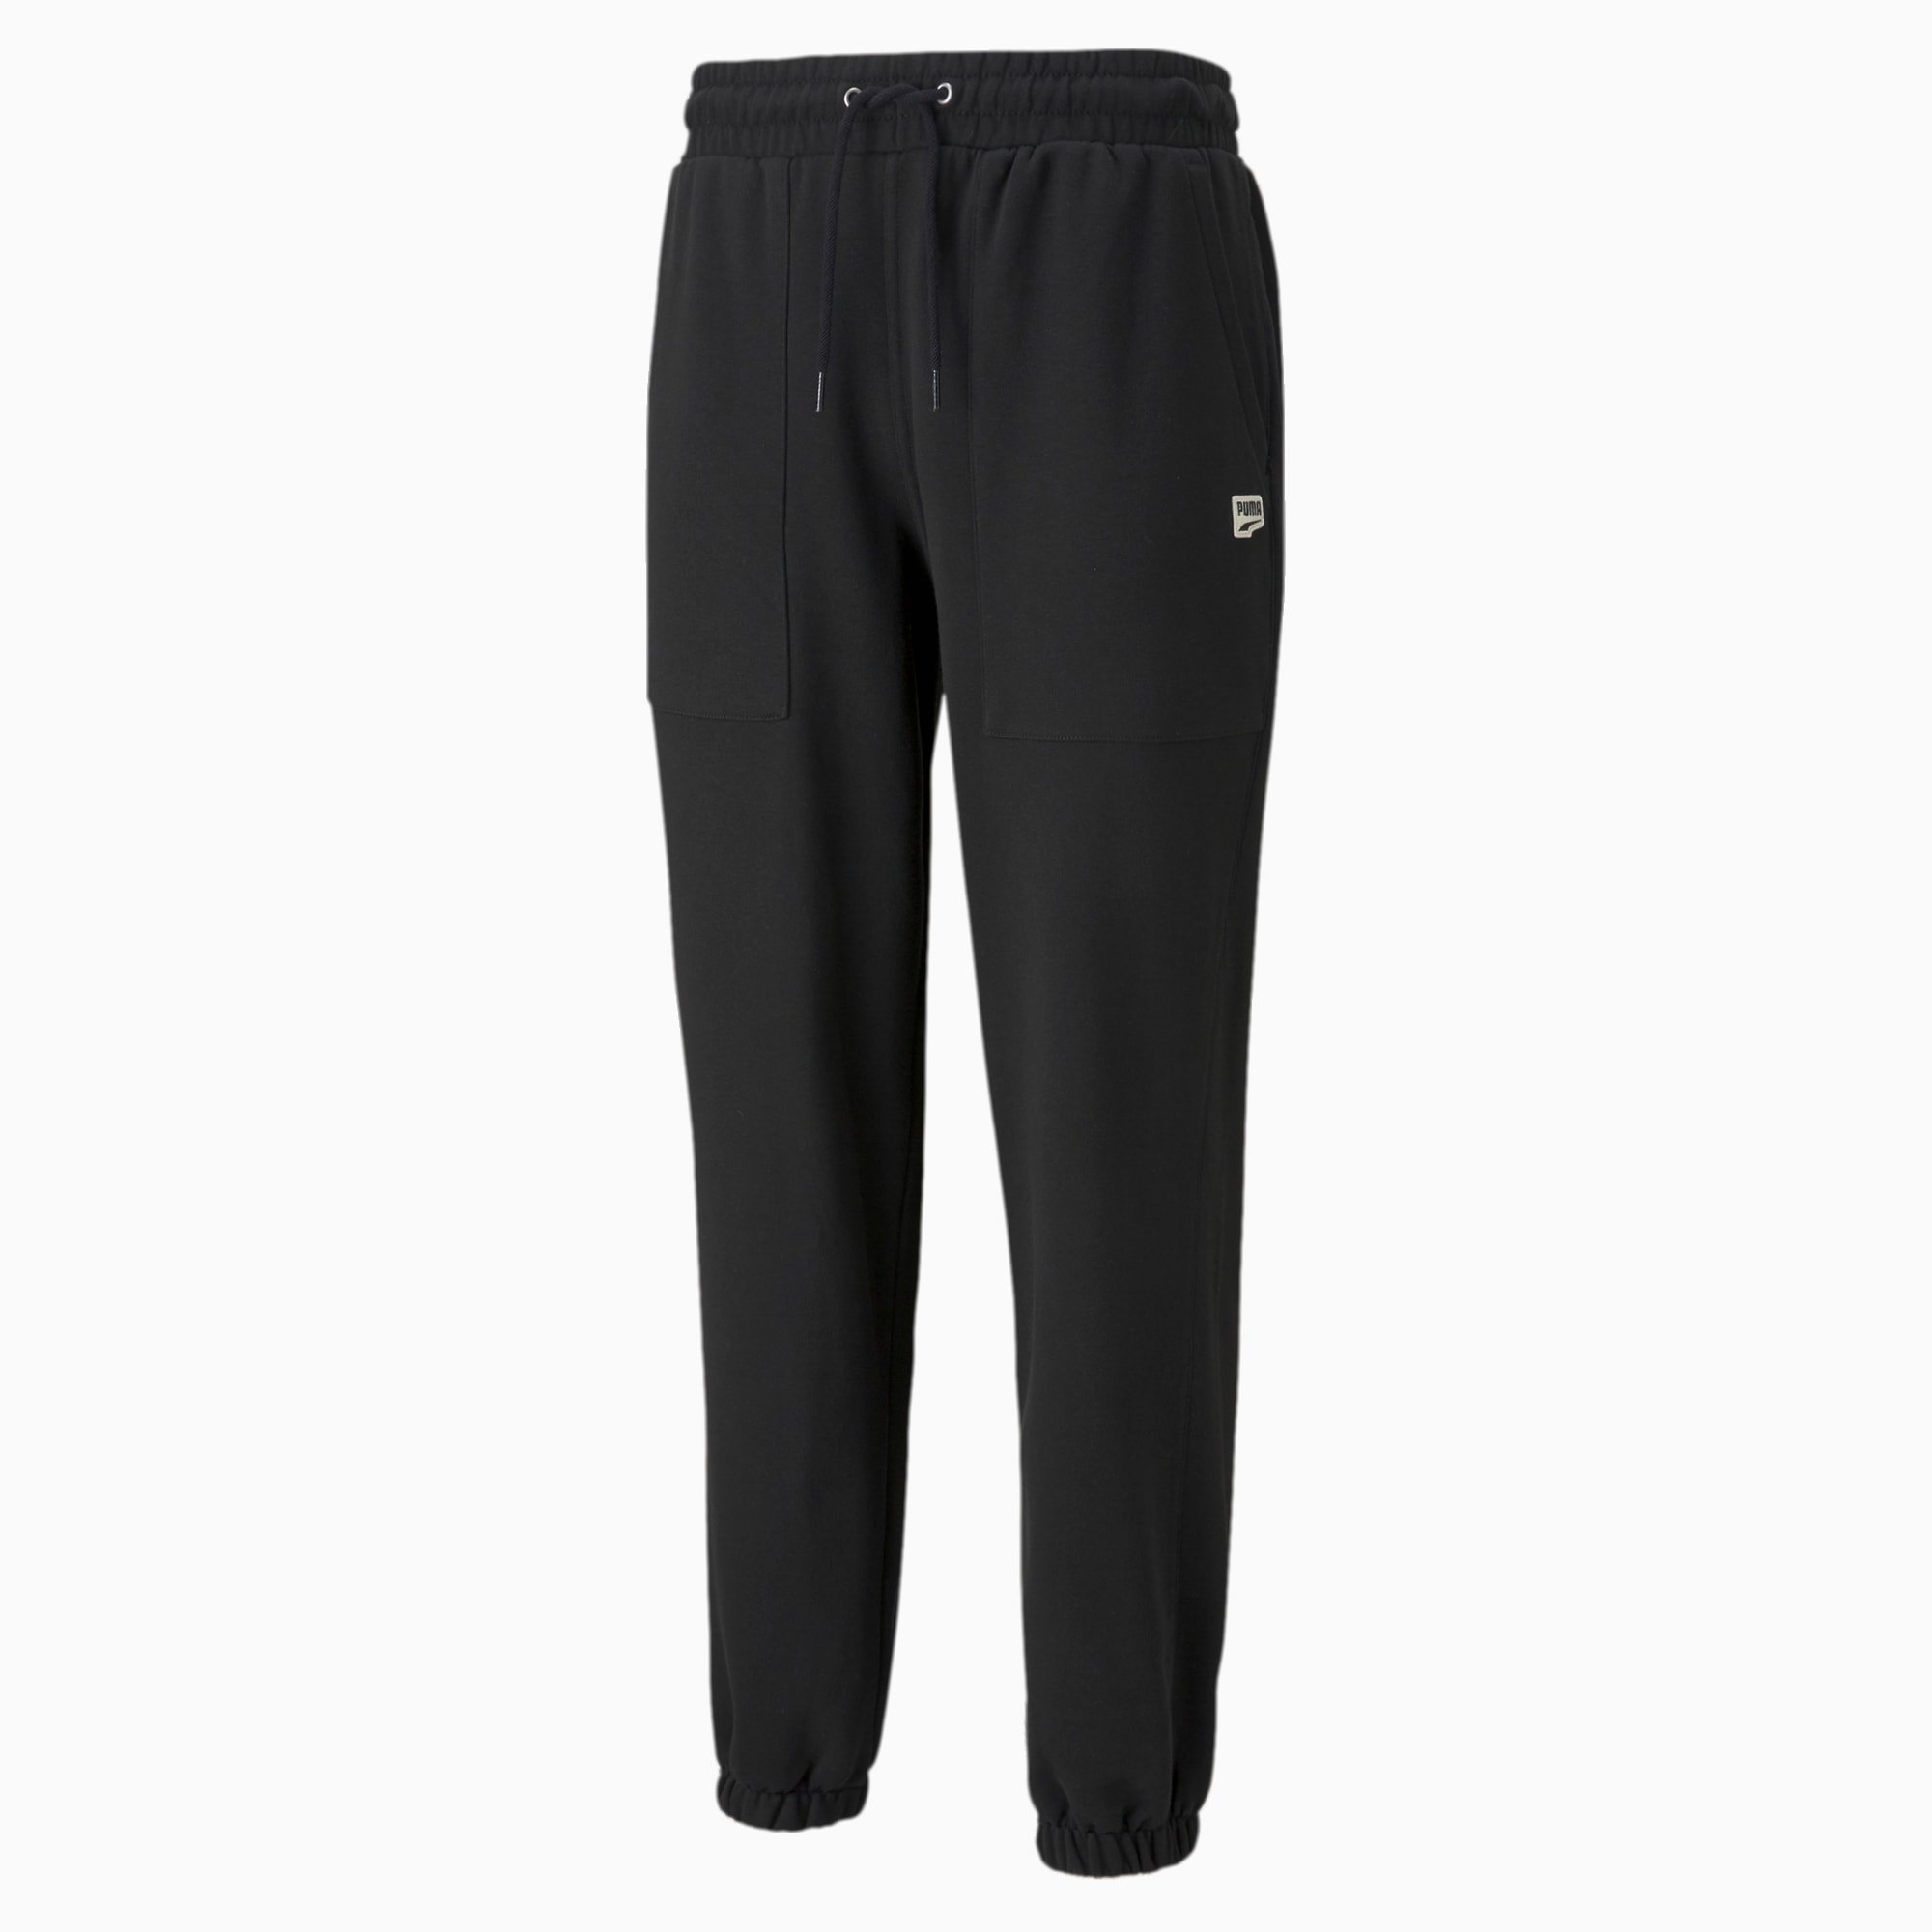 Downtown French Terry Men's Sweatpants